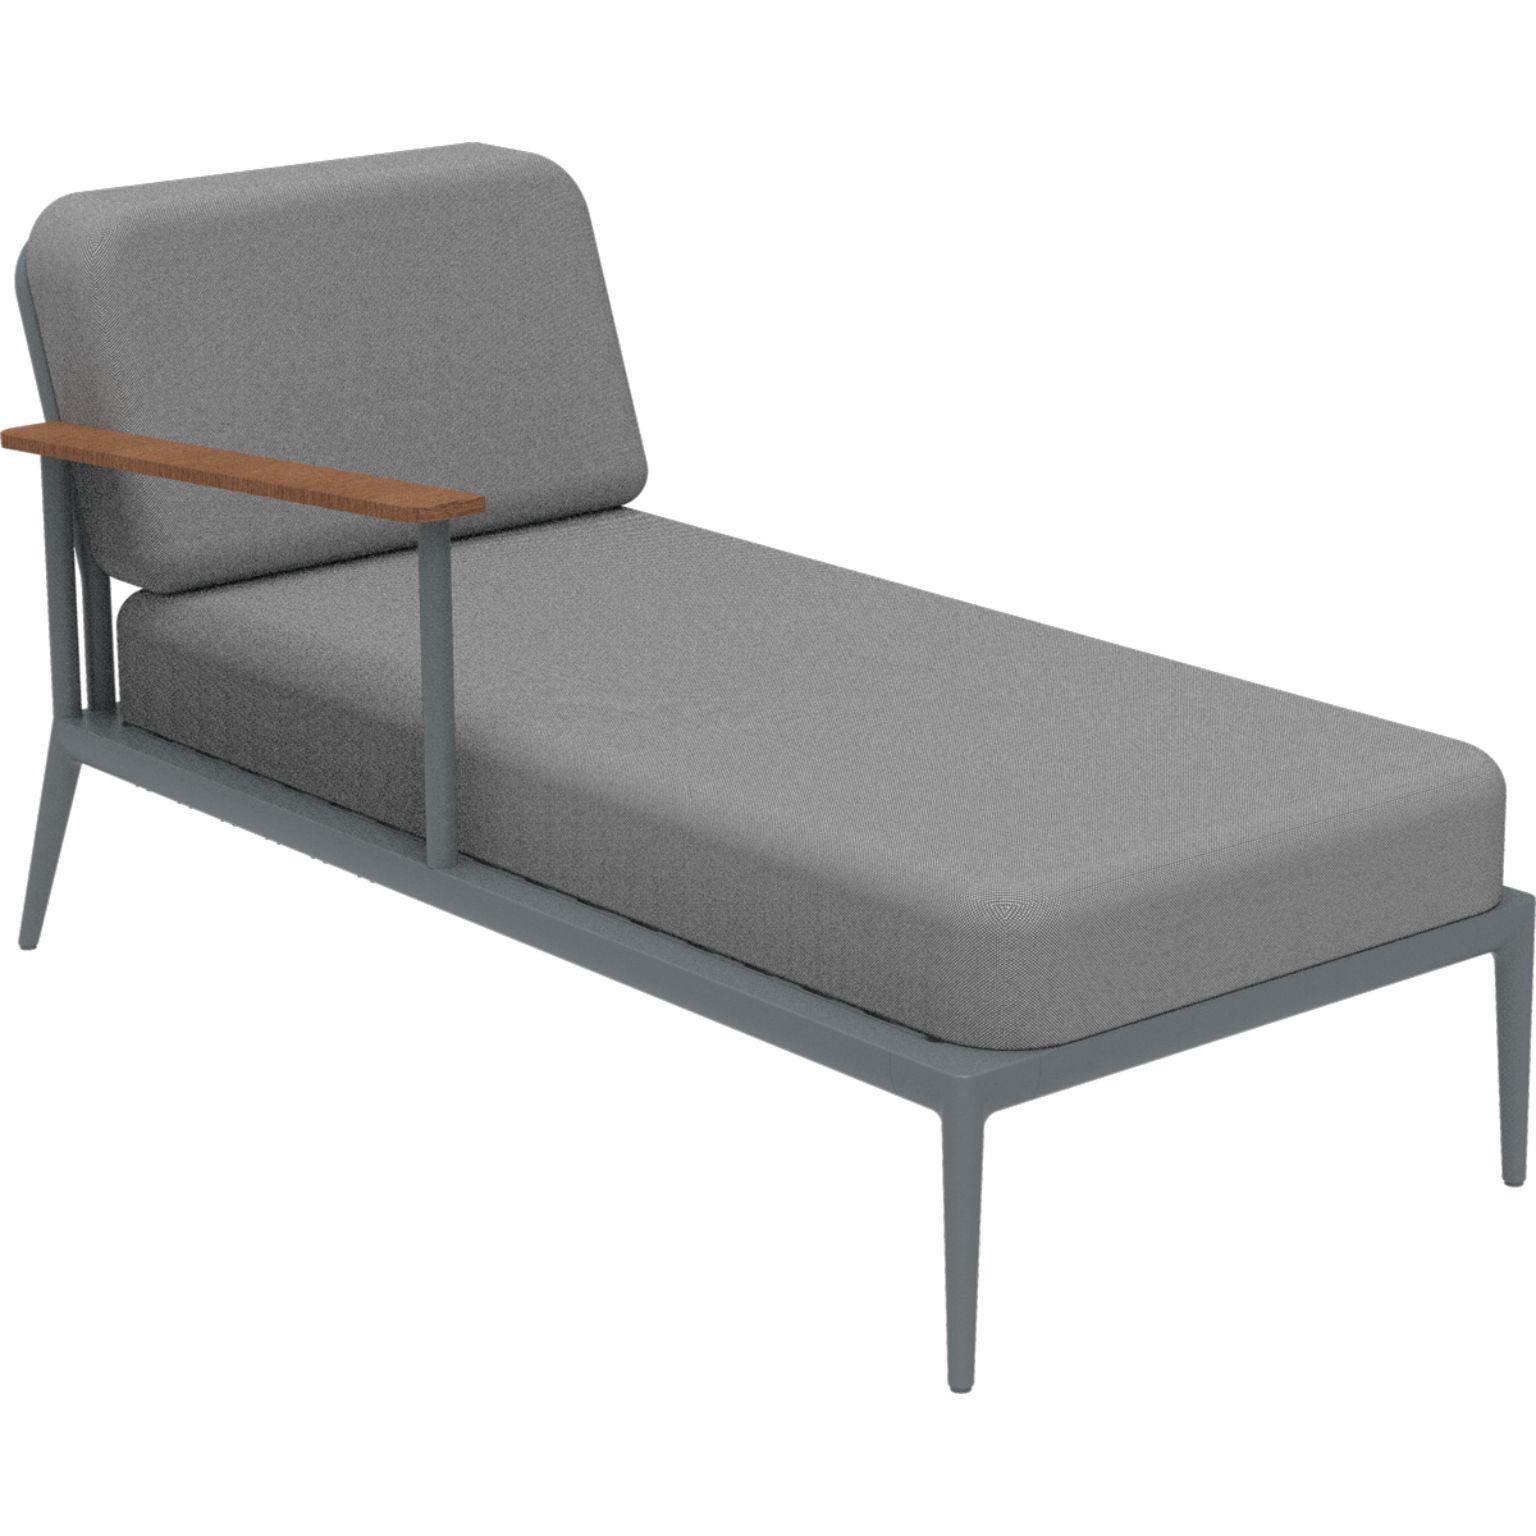 Nature Grey Right Chaise longue by MOWEE
Dimensions: D155 x W76 x H81 cm (seat height 42 cm).
Material: Aluminum, upholstery and Iroko Wood.
Weight: 28 kg.
Also available in different colors and finishes. 

An unmistakable collection for its